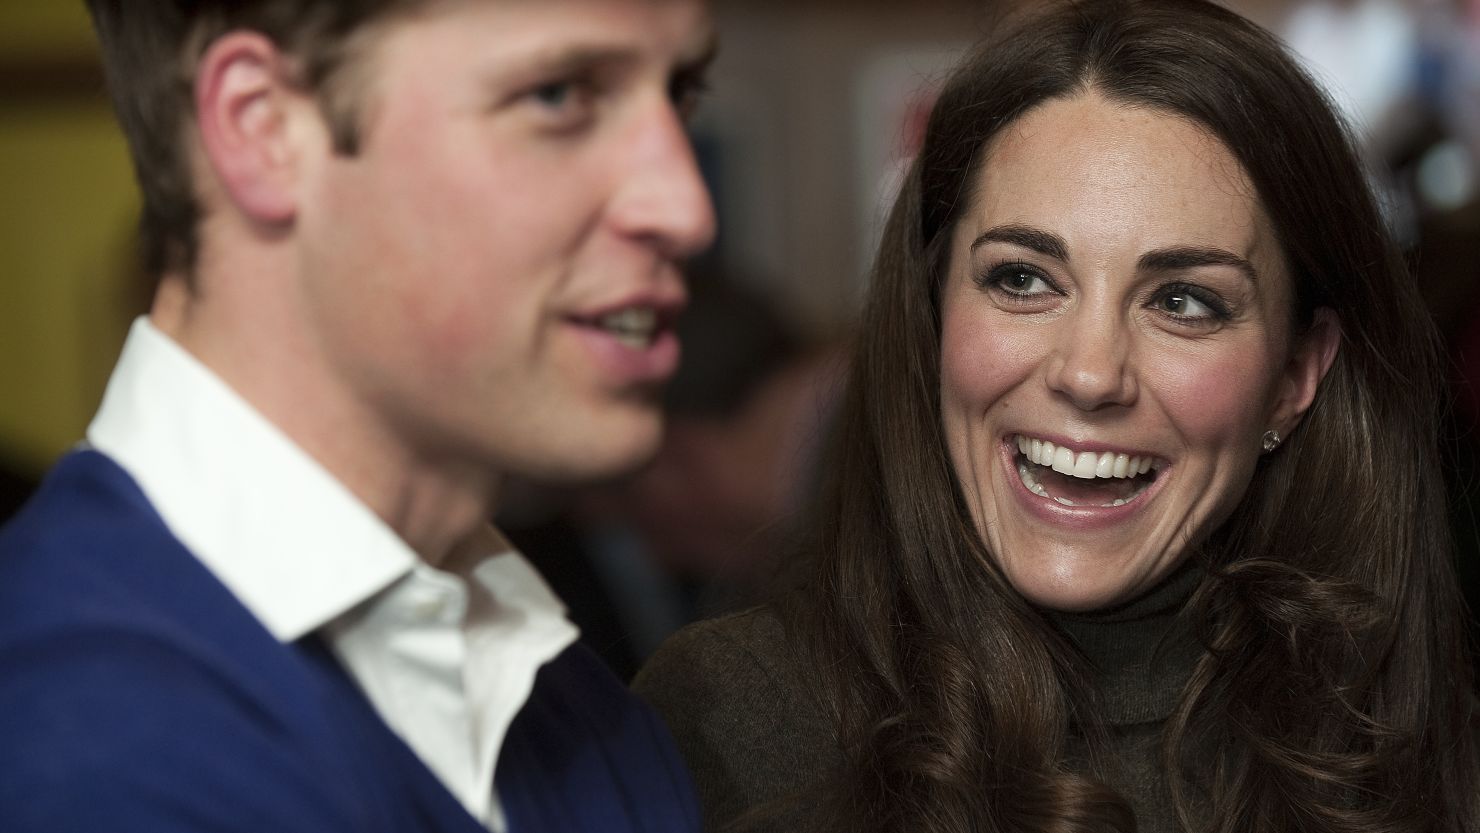 Among the exclusives the News of the World unearthed were that Kate Middleton called Prince William "babykins."